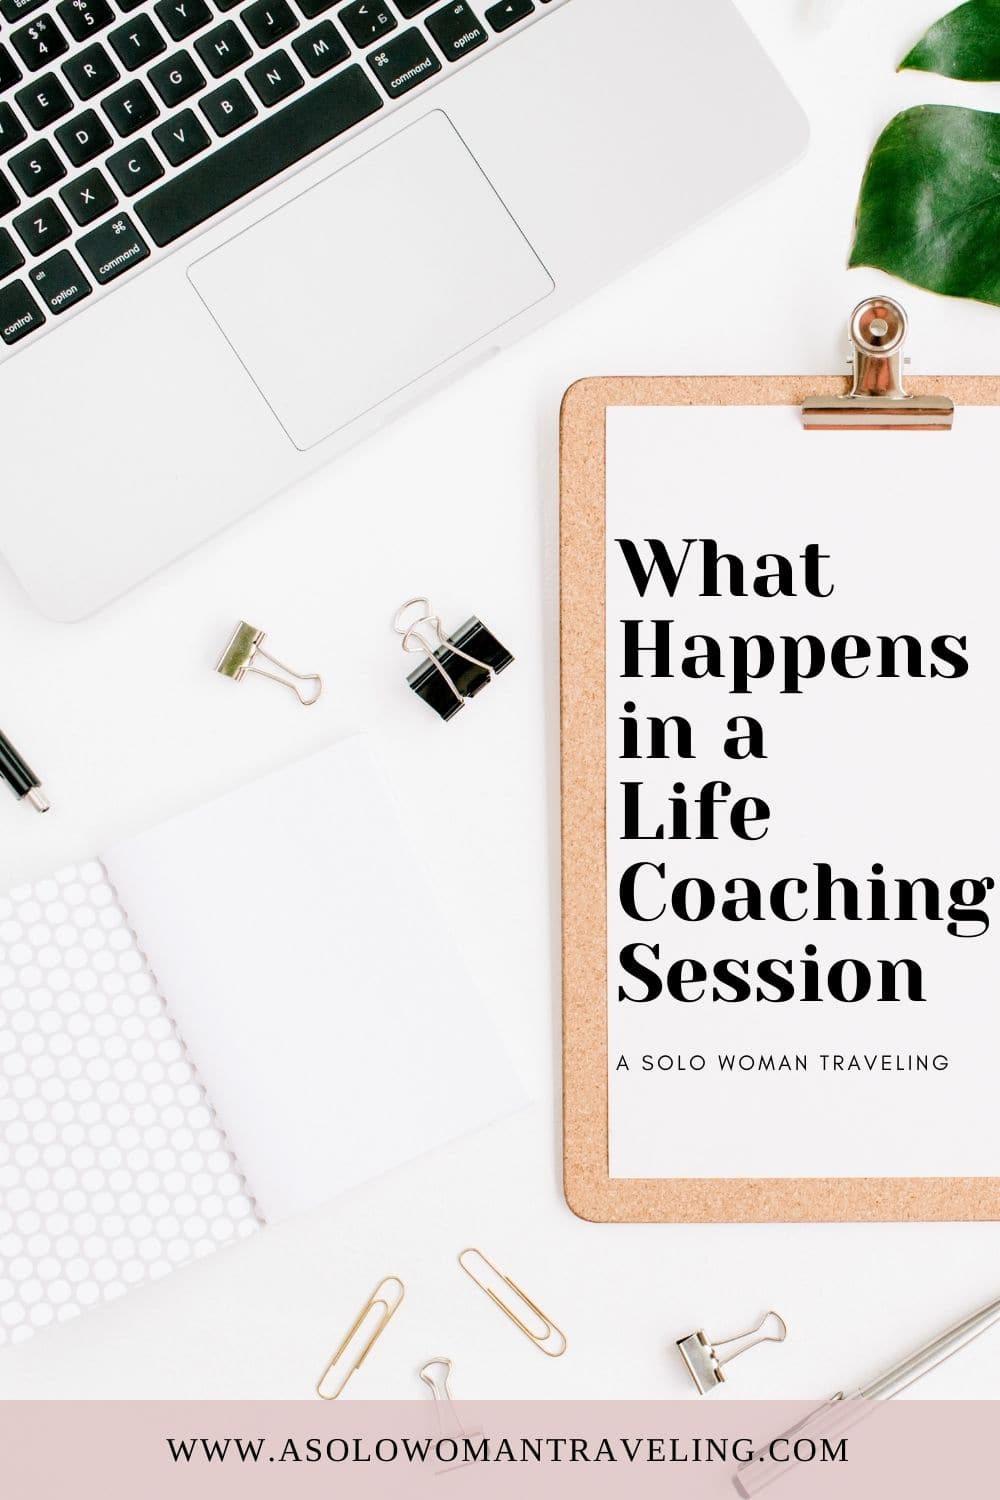 What Happens in a Life Coaching Session